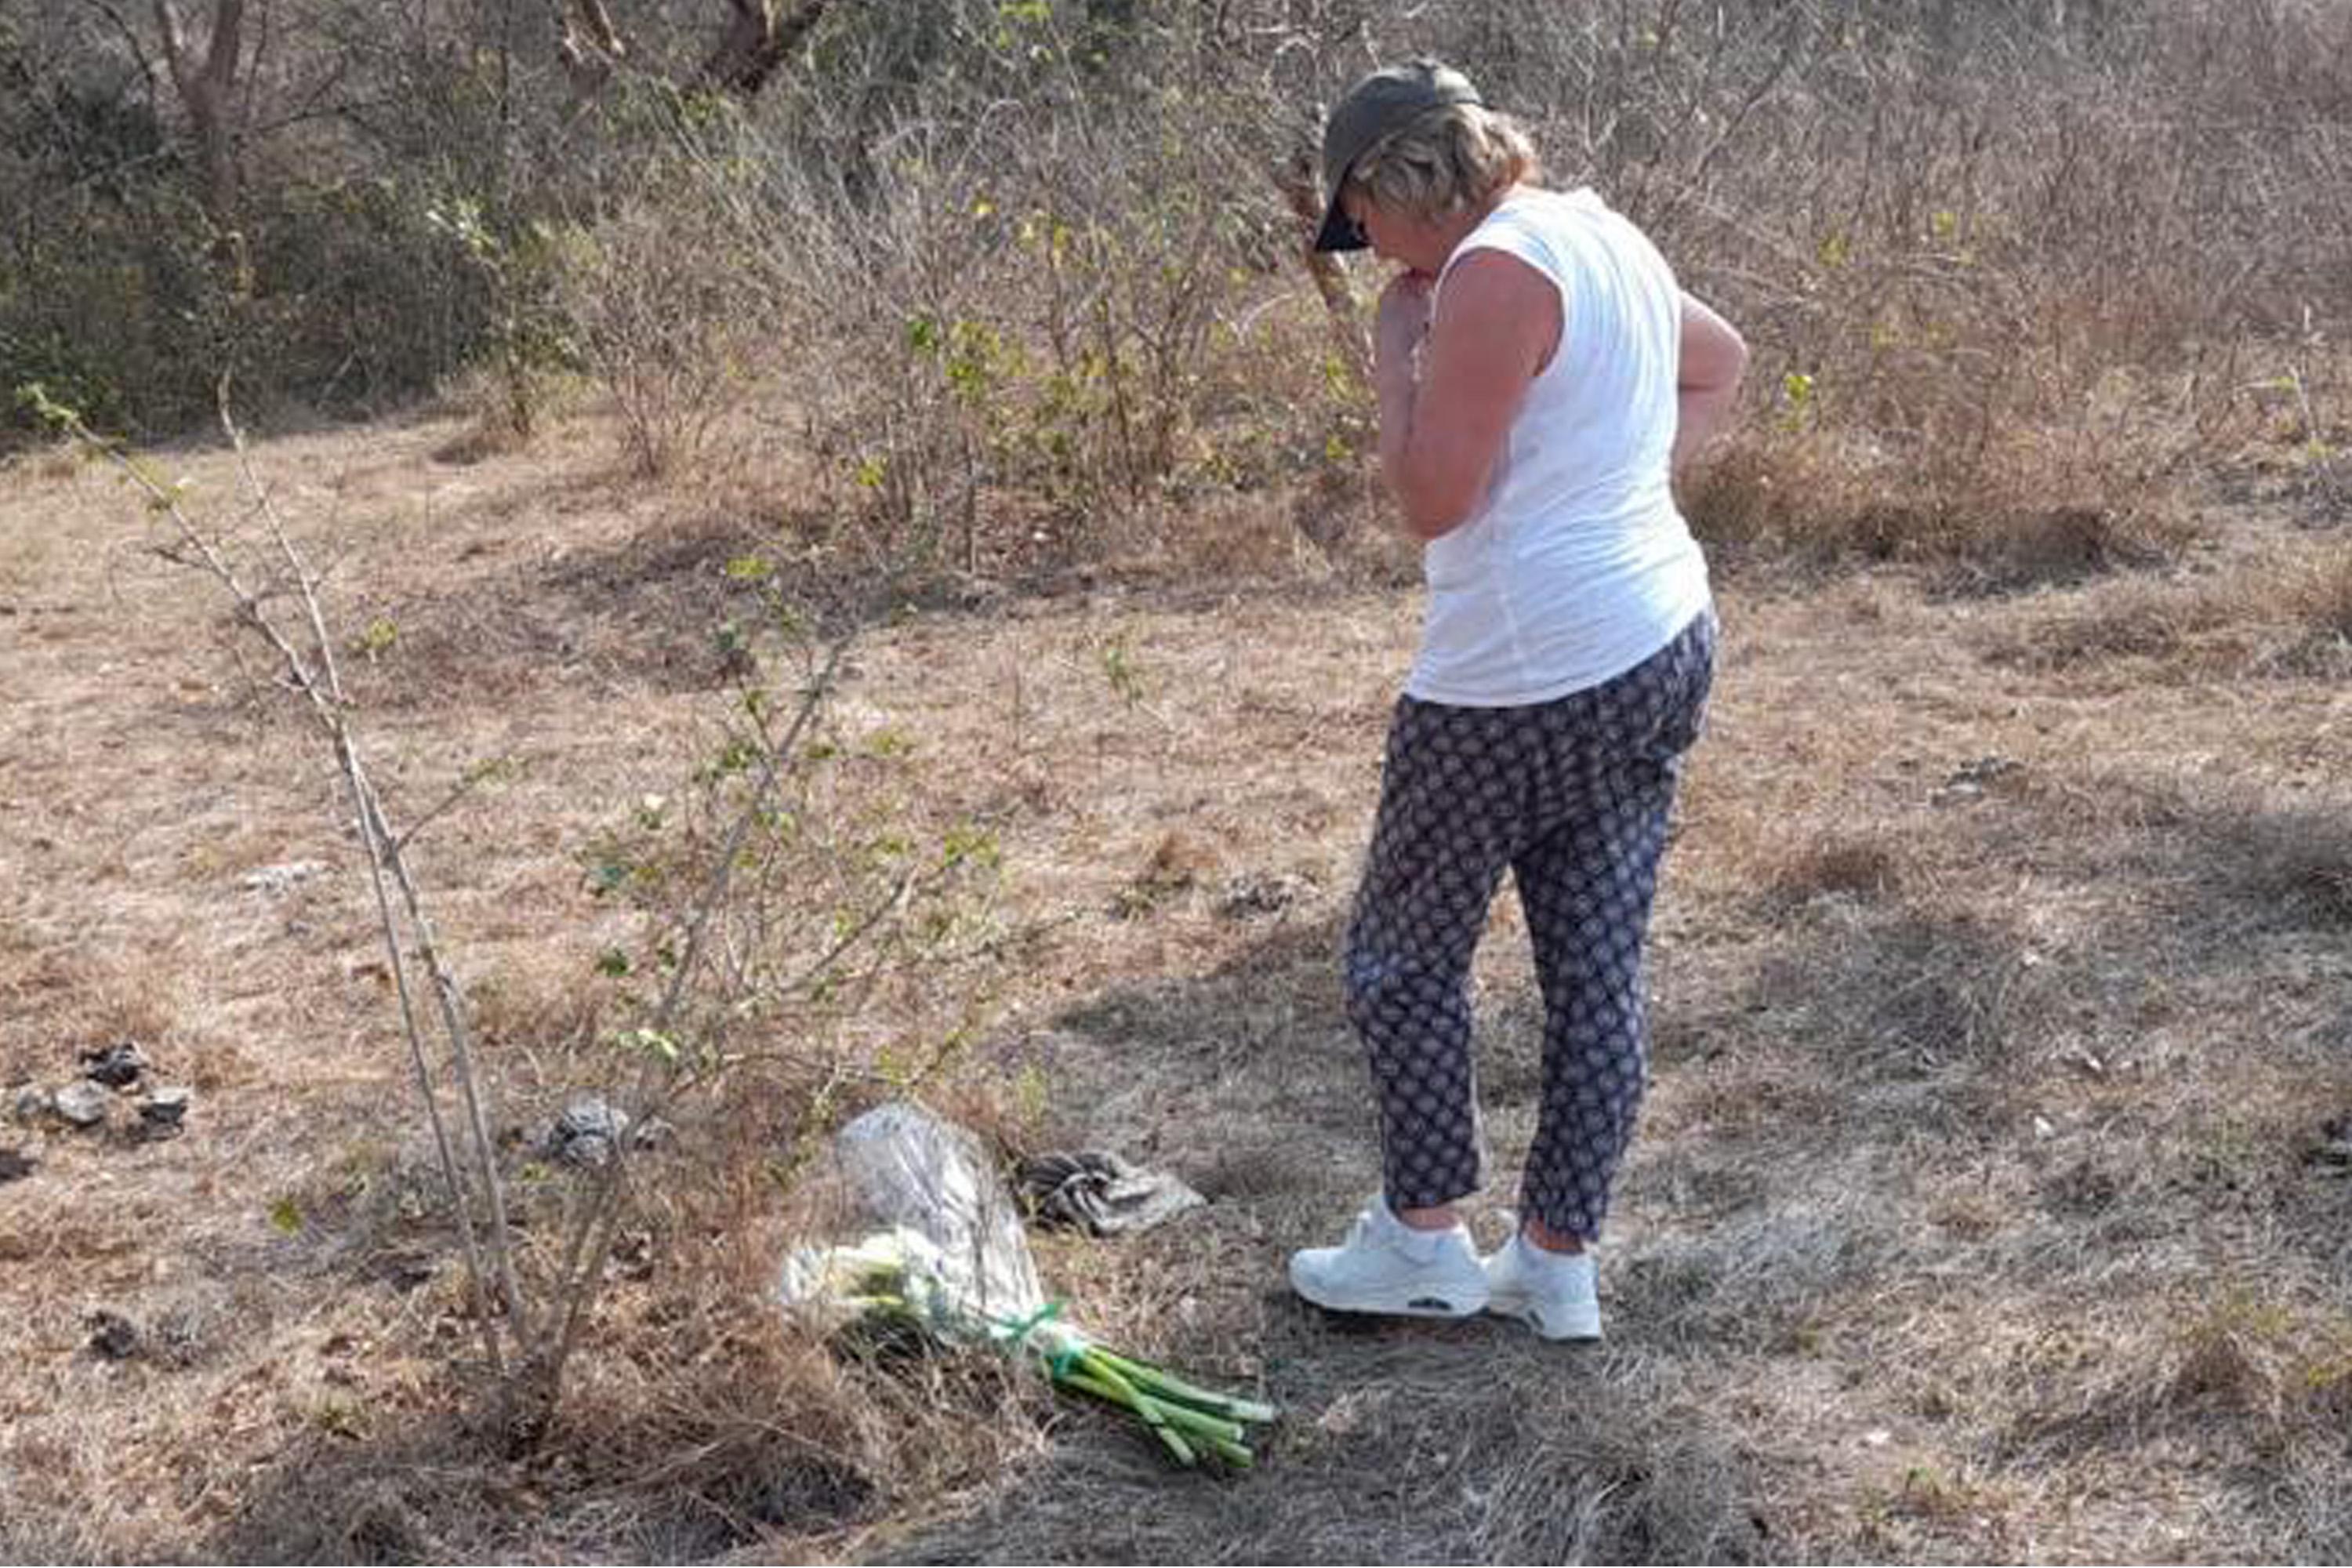 In March, 2022, Sonja Ter Laag, the sister of Dutch journalist Hans Ter Laag, visited the site of his 1982 murder in rural Chalatenango. It was her first visit to the country. Photo courtesy Sonja Ter Laag